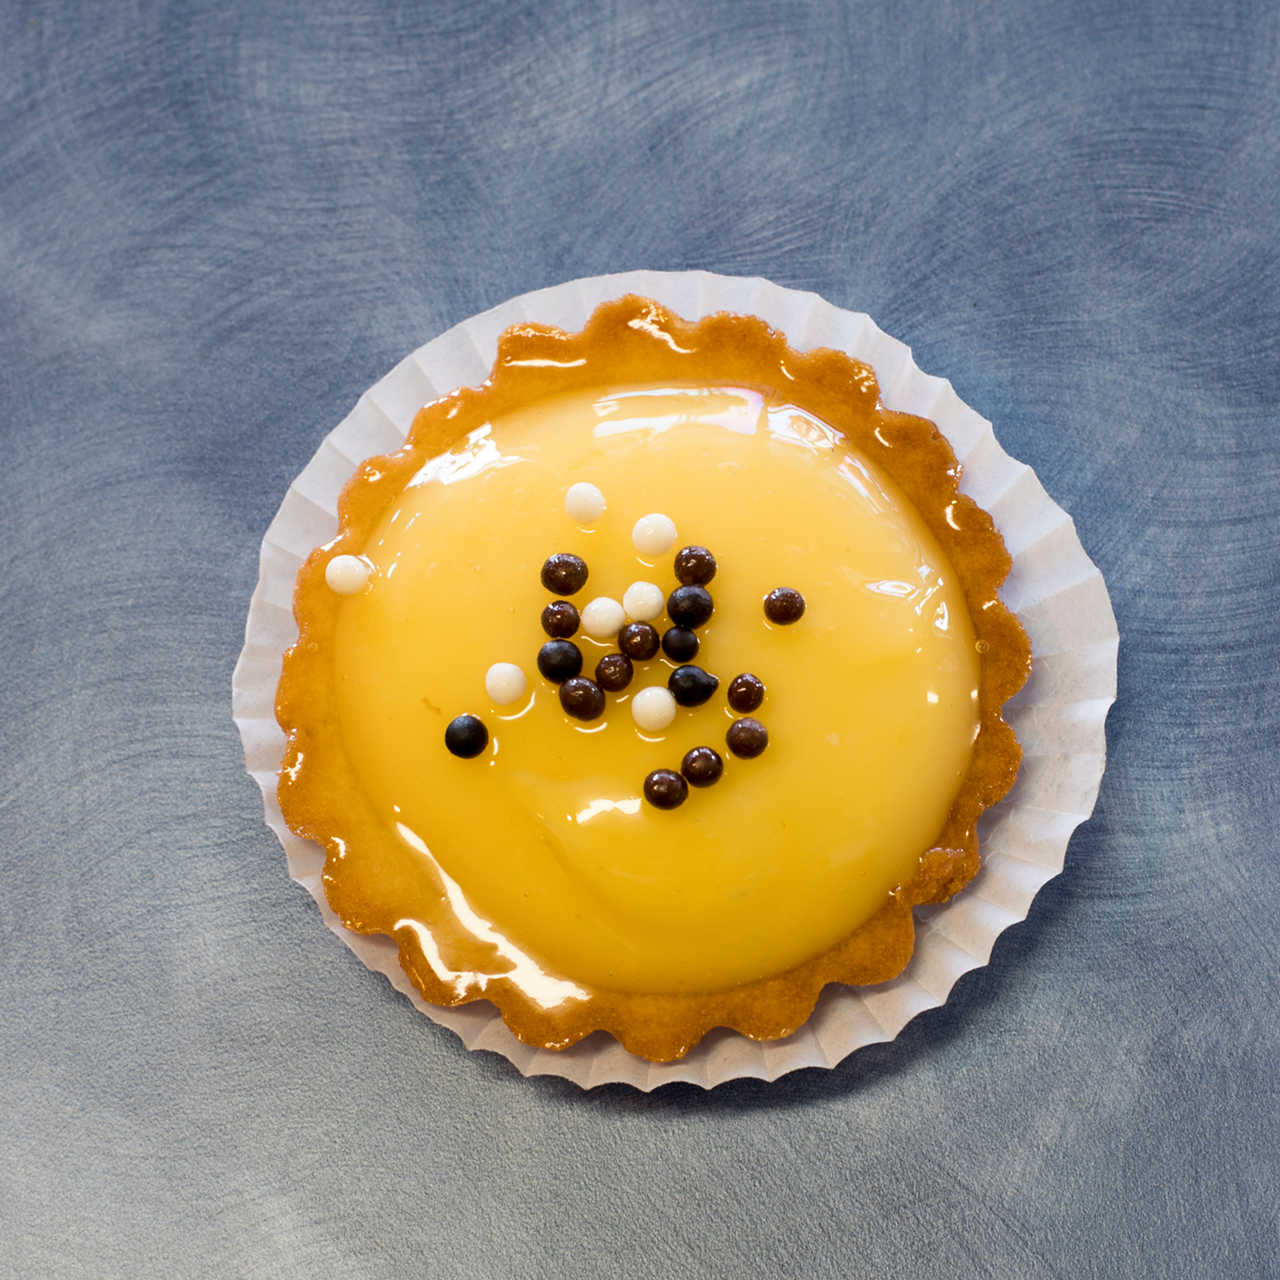 Flying with Jerome's pastries and desserts, including this lemon tart, are thrilling.